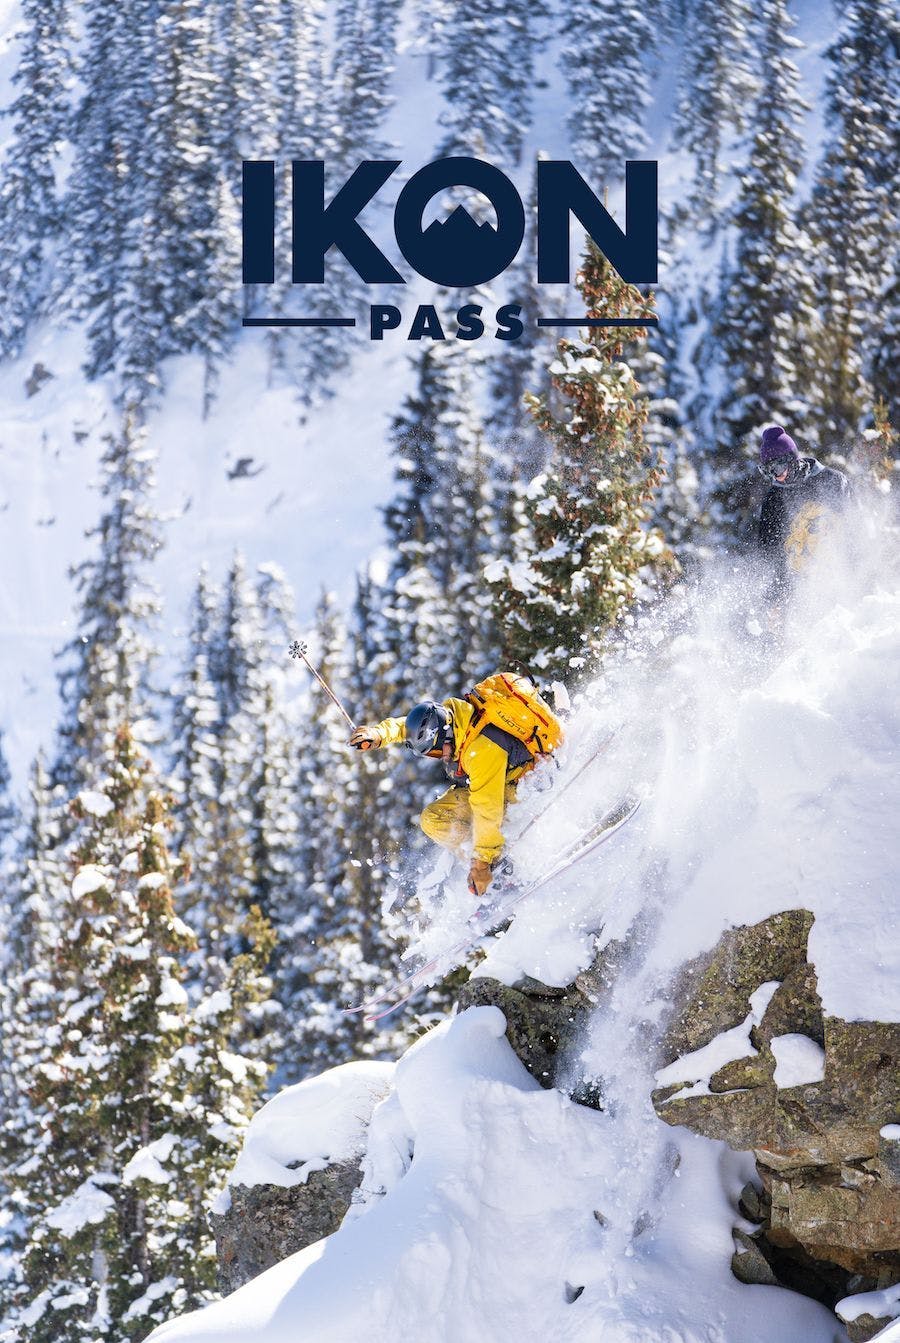 Ikon Pass logo with skier hucking a clif in the background